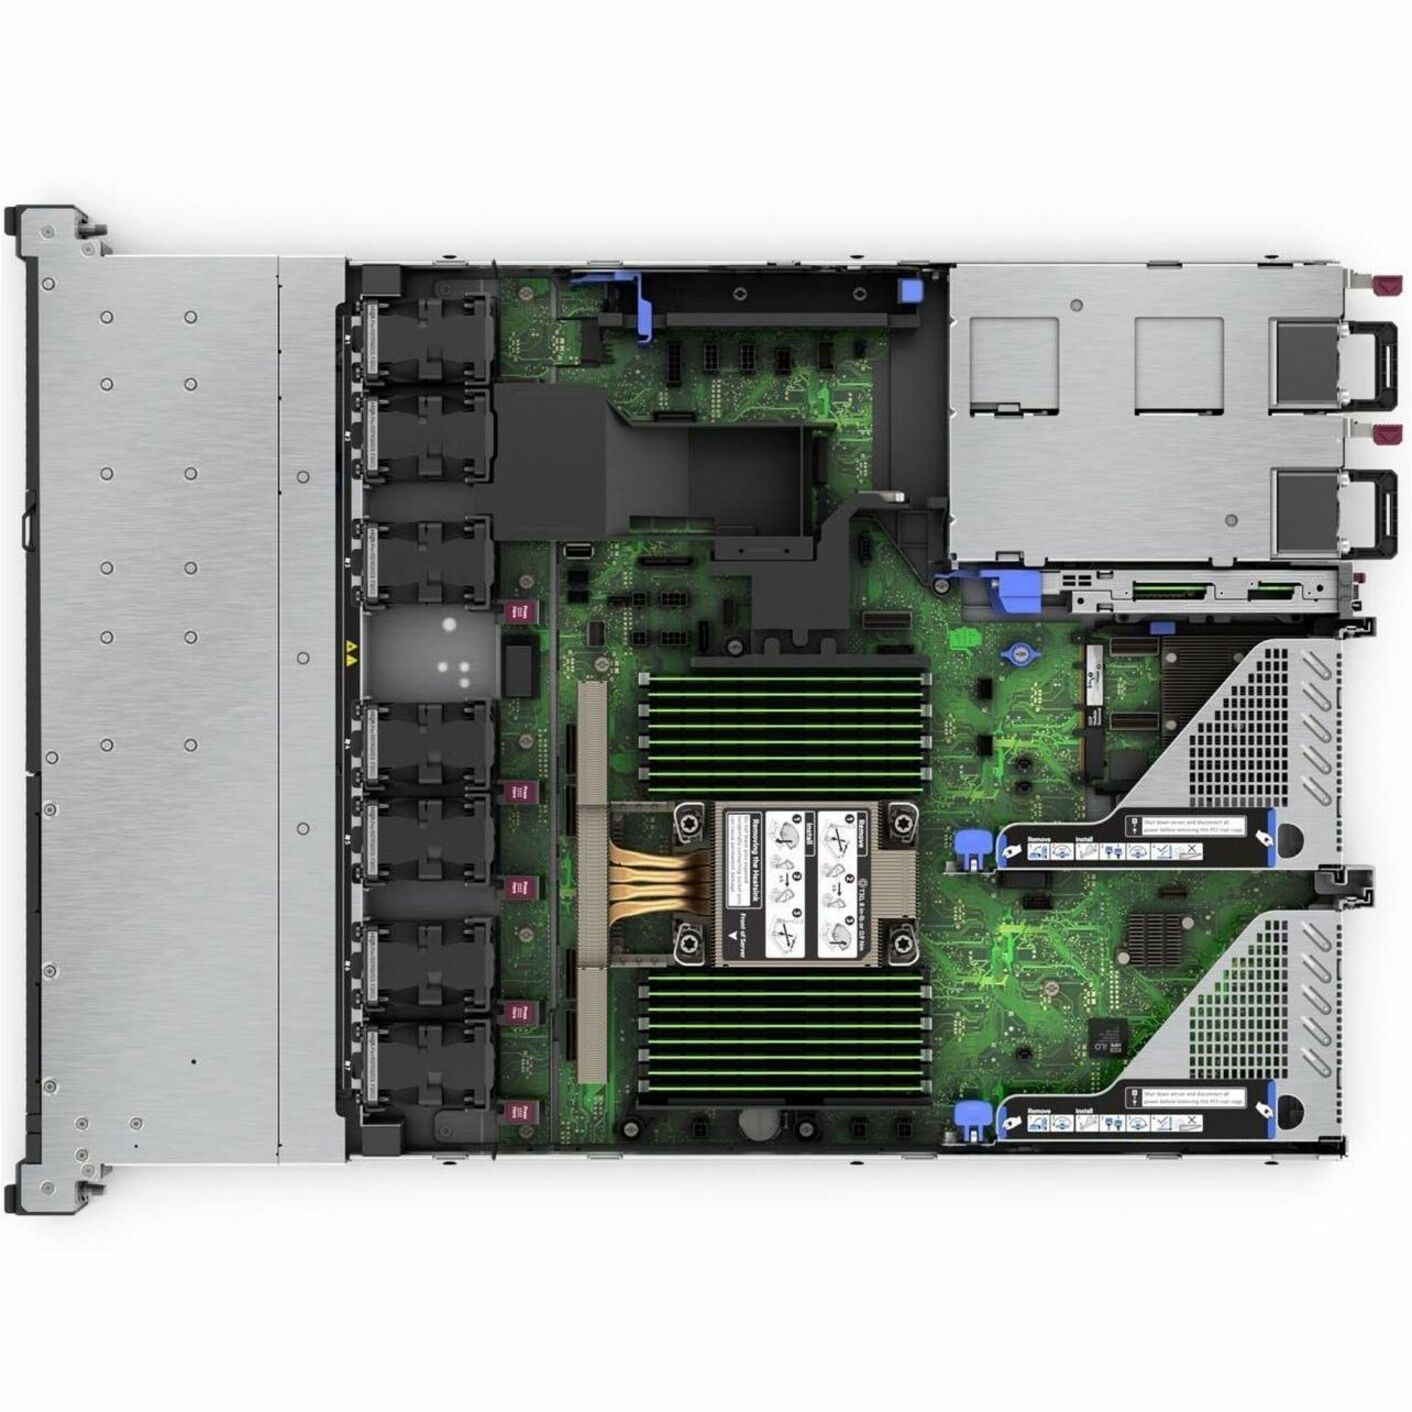 HPE P57685-B21 ProLiant DL320 Gen11 3408U 1.8GHz 8-core 1P 16GB-R 4LFF 500W PS Server, Powerful and Reliable Server Solution